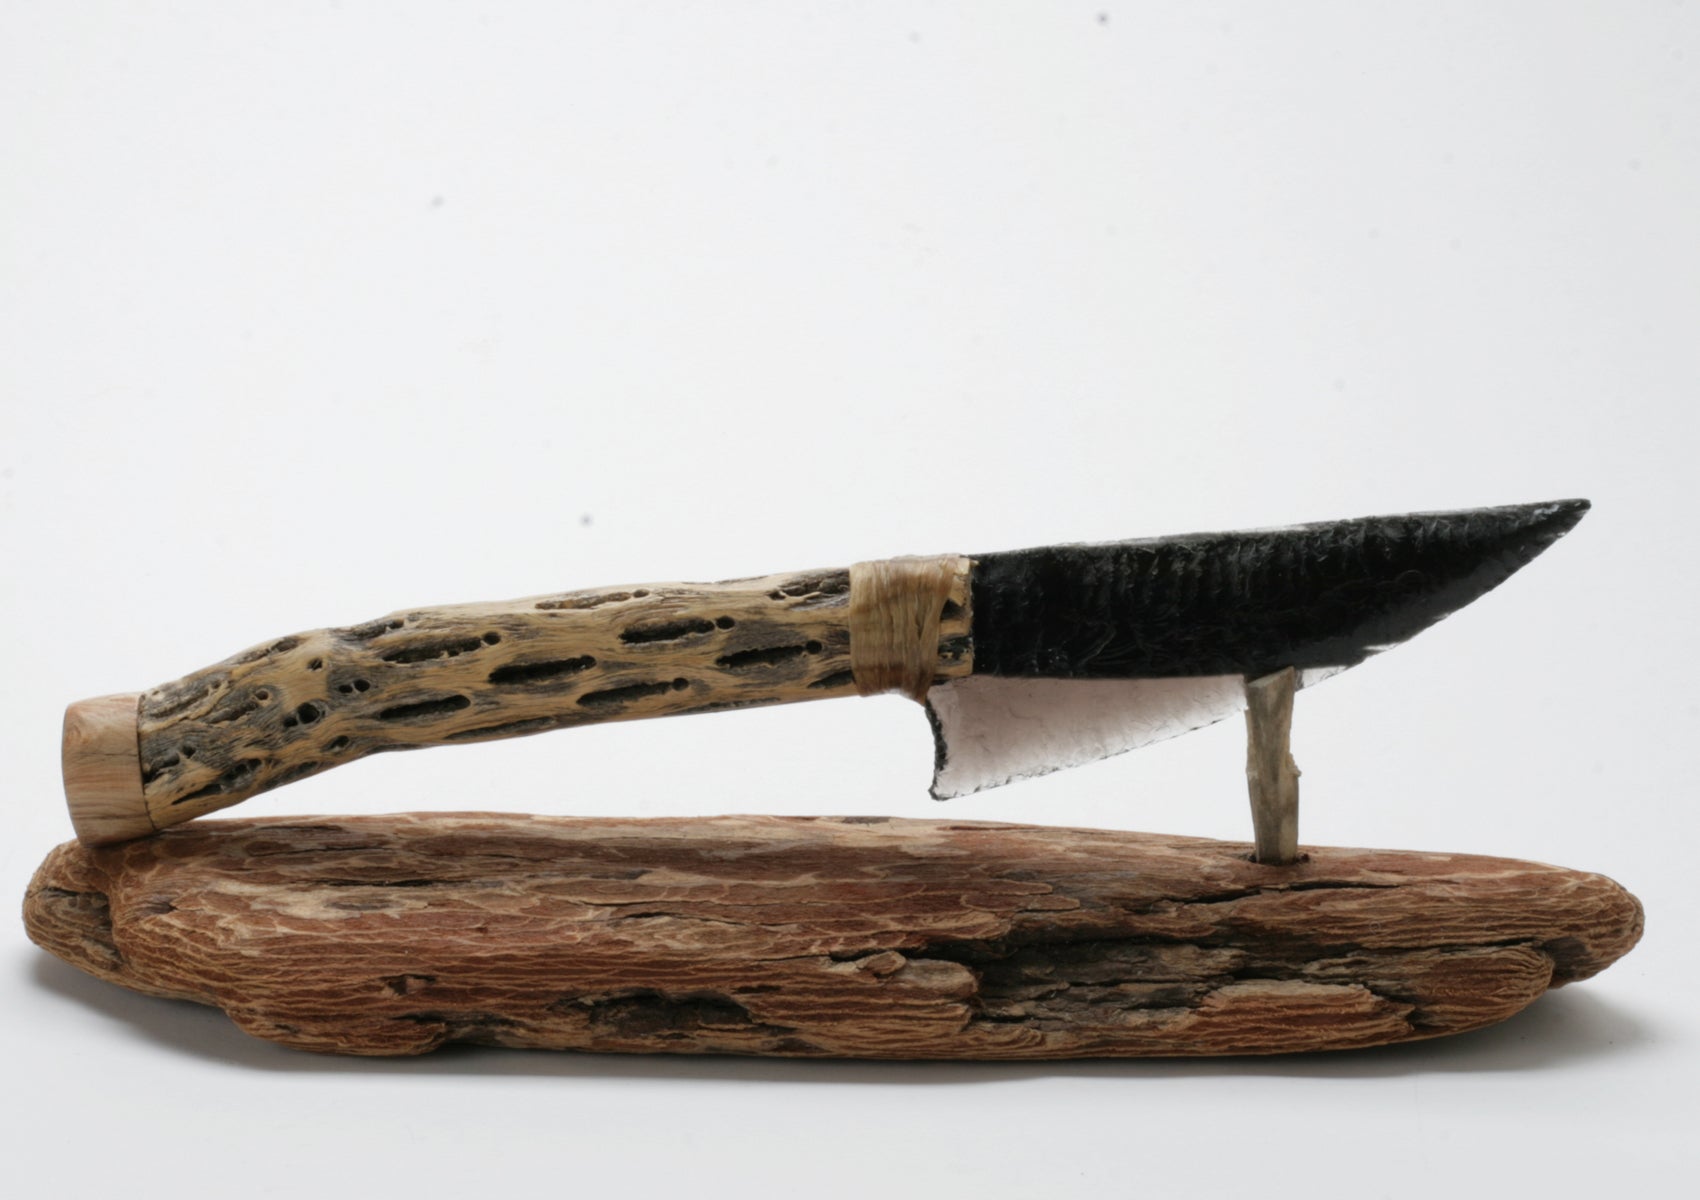 Black & Transparent Obsidian Knife with Cholla Cactus handle